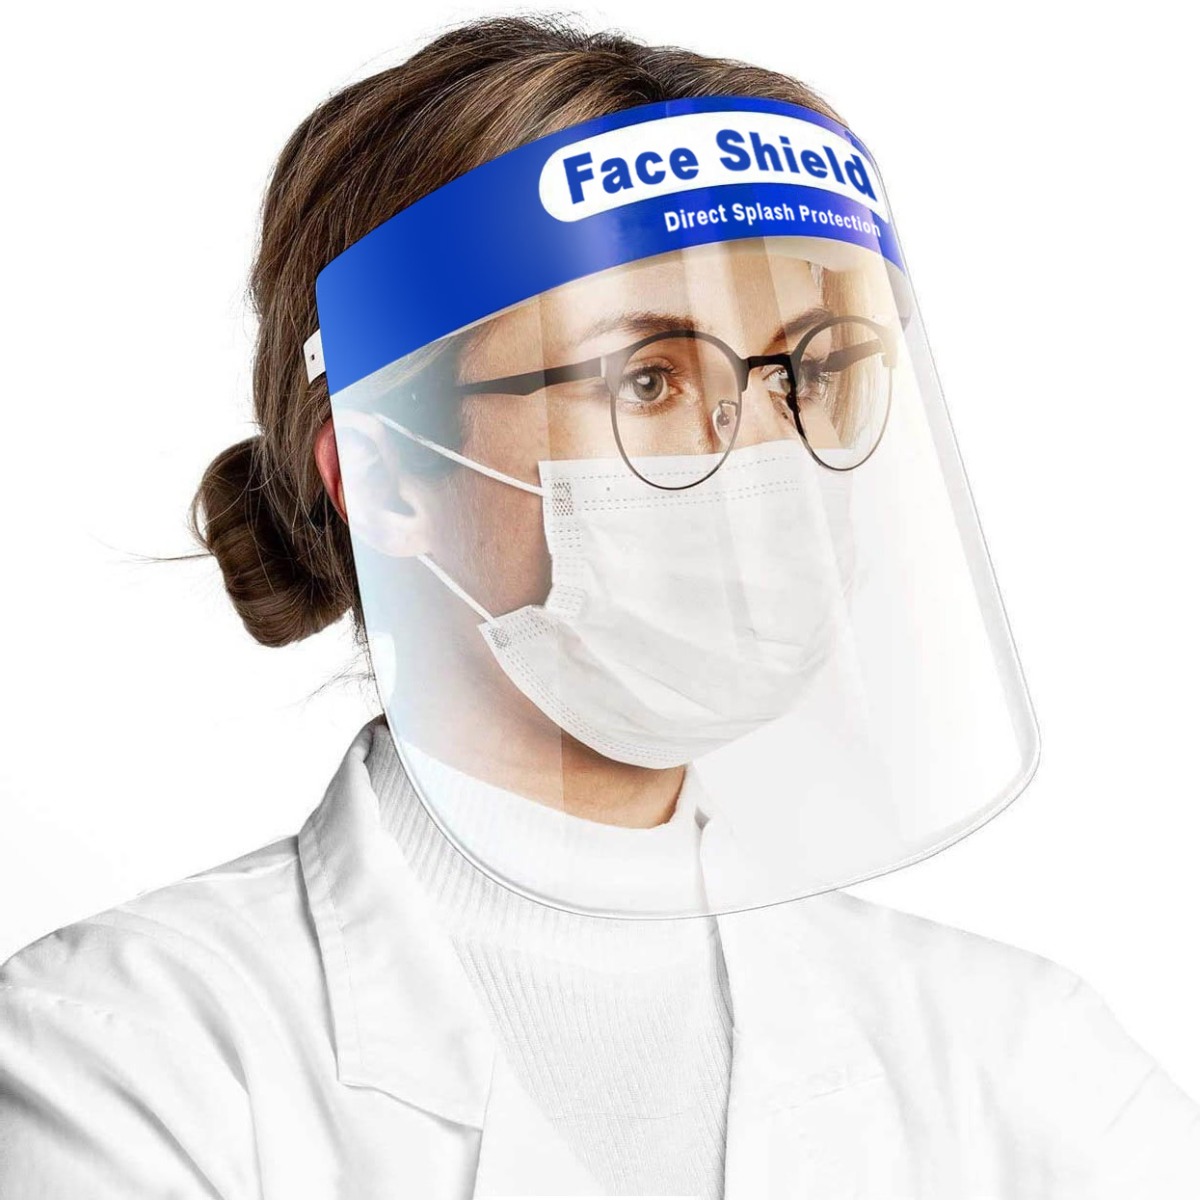 Plastic Face Shield: Durable Clear Plastic Protective Shield With Comfortable Foam & Elastic Fittings